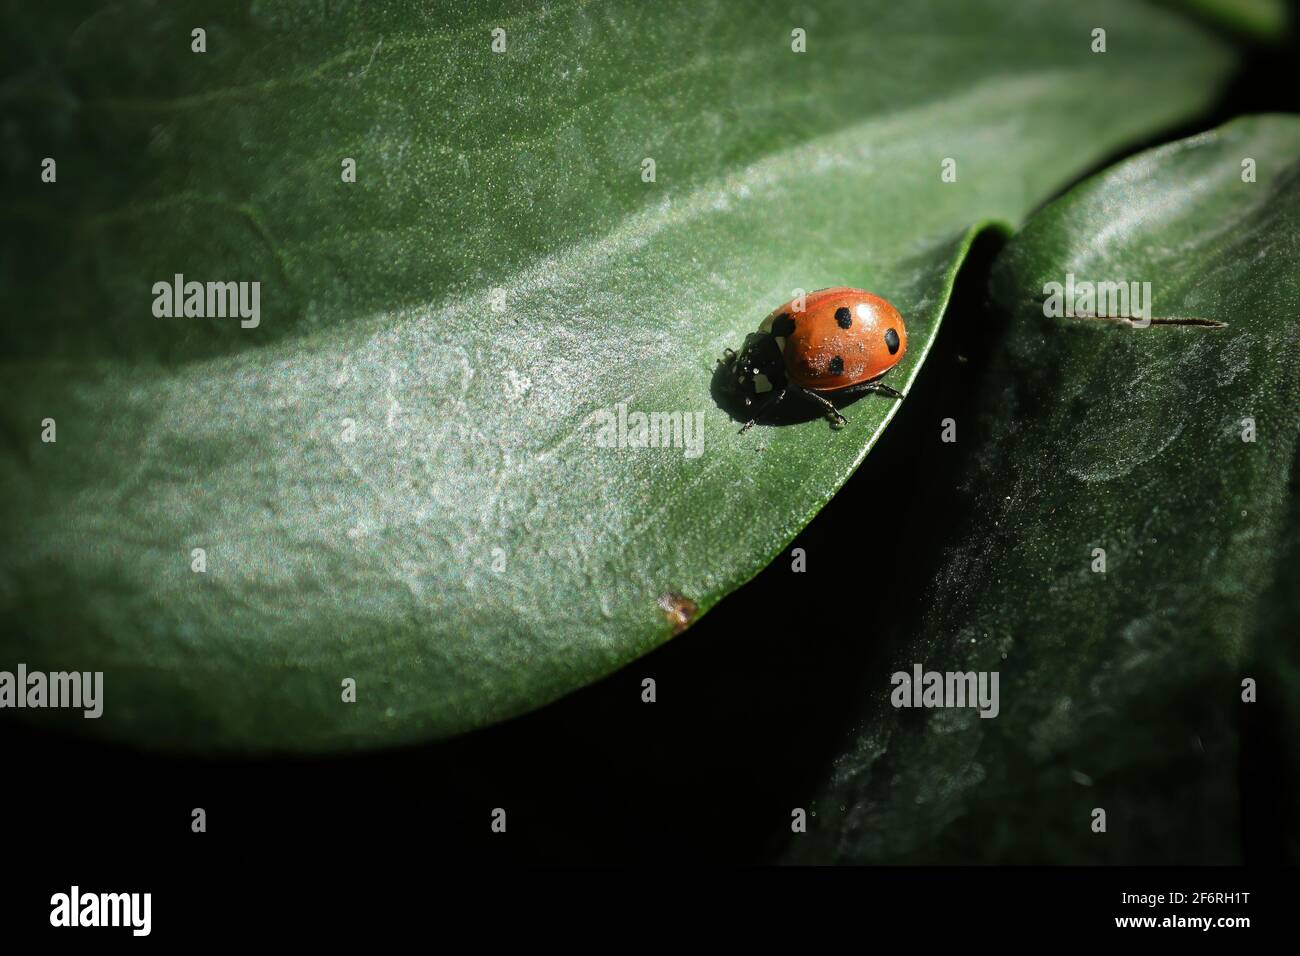 Background of a ladybug on a green smooth leaf Stock Photo